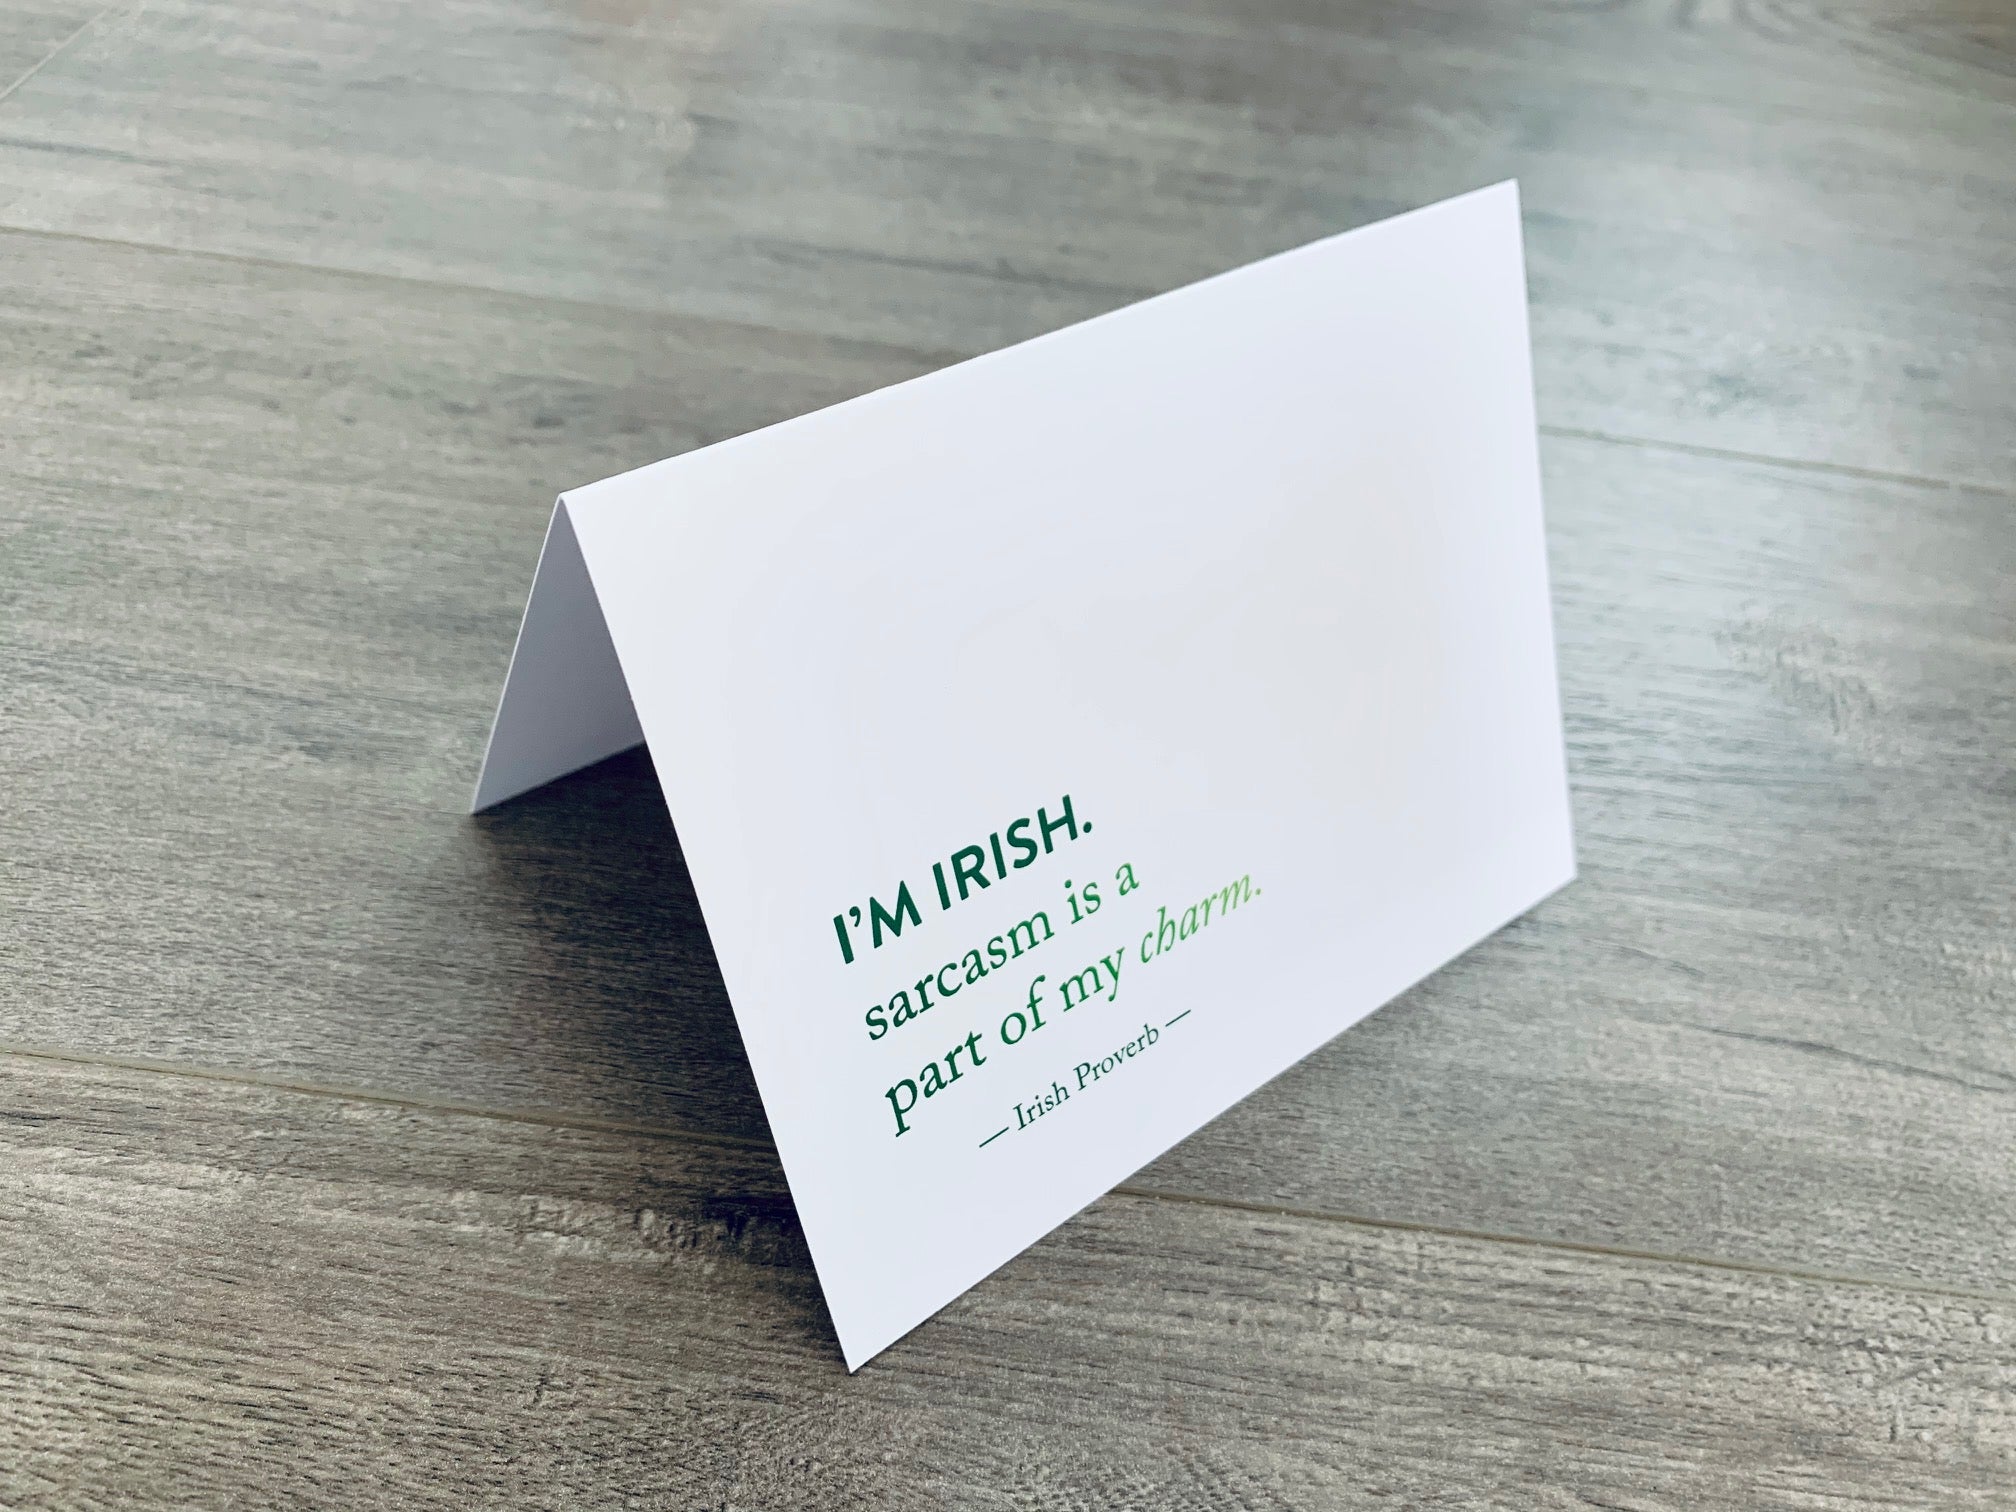 A white folded notecard is propped up on a wooden floor. The card has the Irish proverb, "I'm Irish. Sarcasm is a part of my charm." From the Irish Laughs Collection by Stationare.